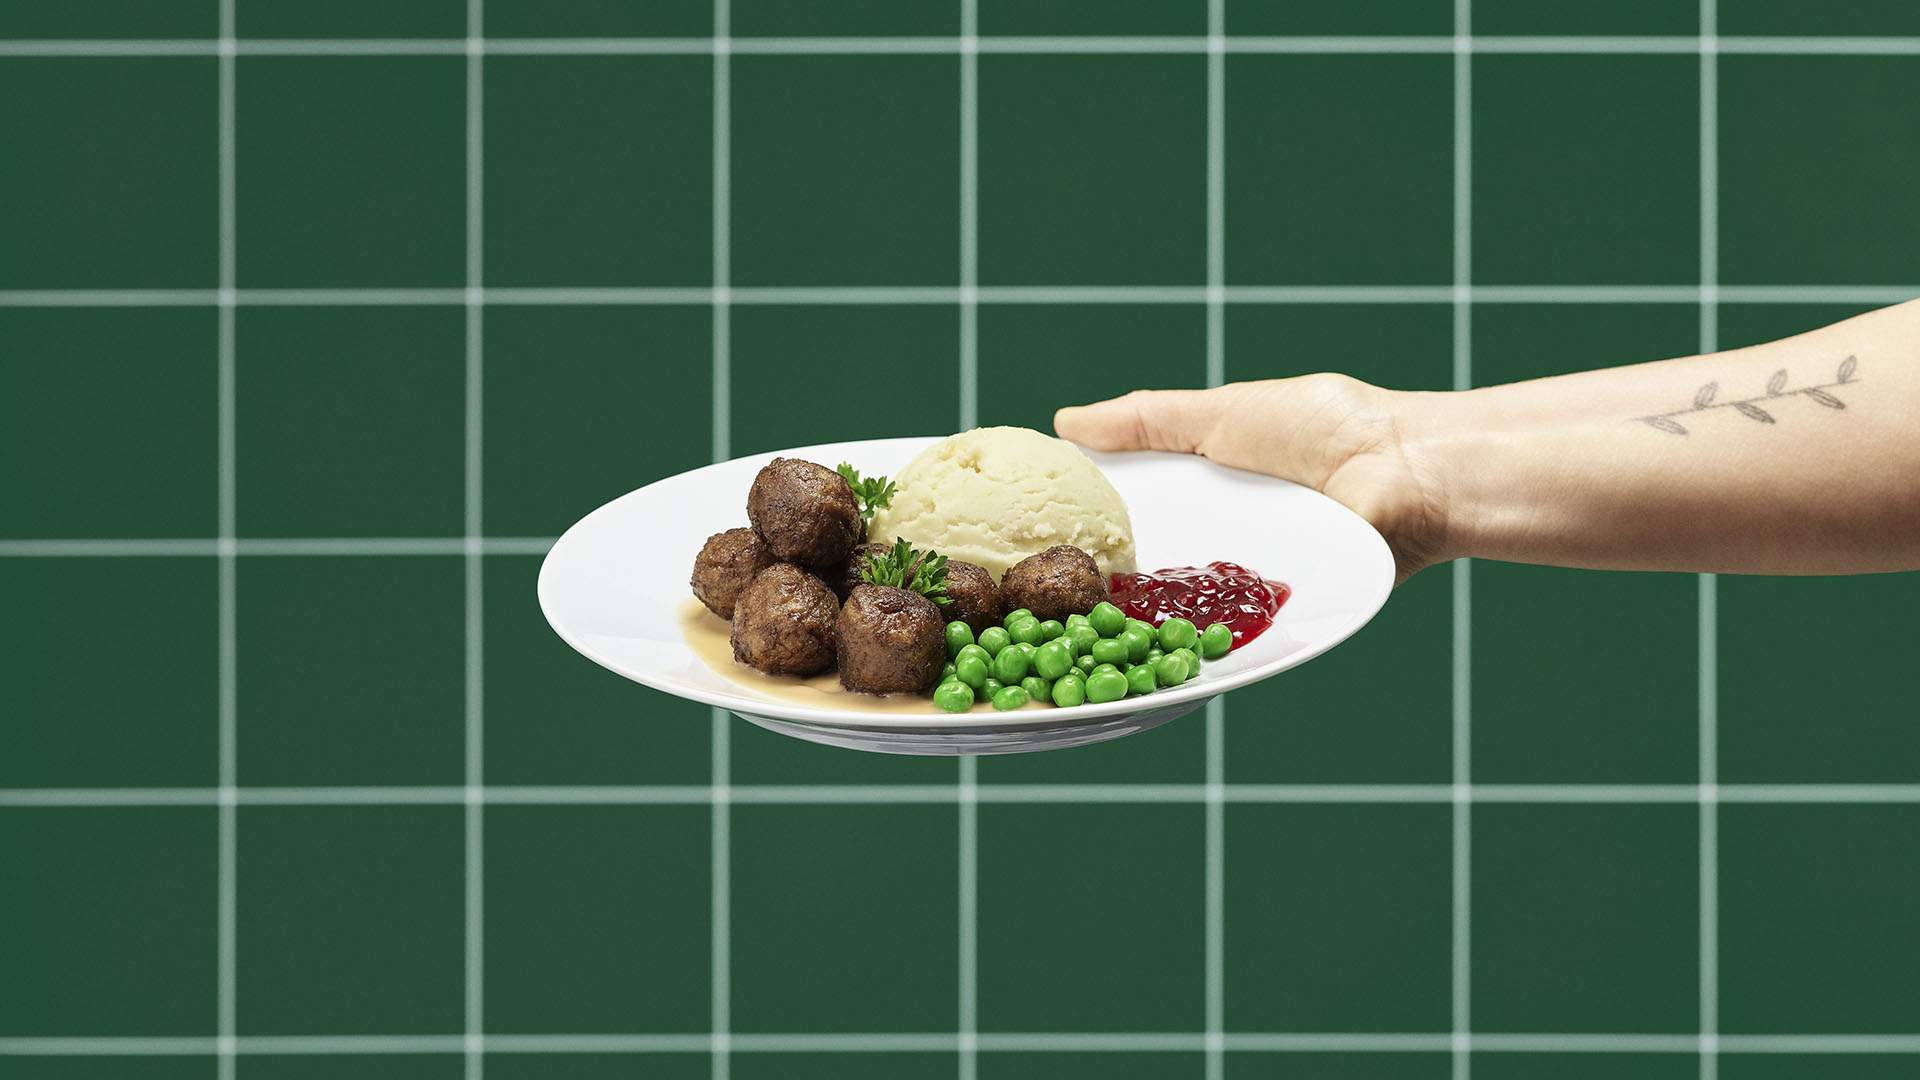 IKEA Is Bringing Its New Meatless Meatballs to Australia from Next Month